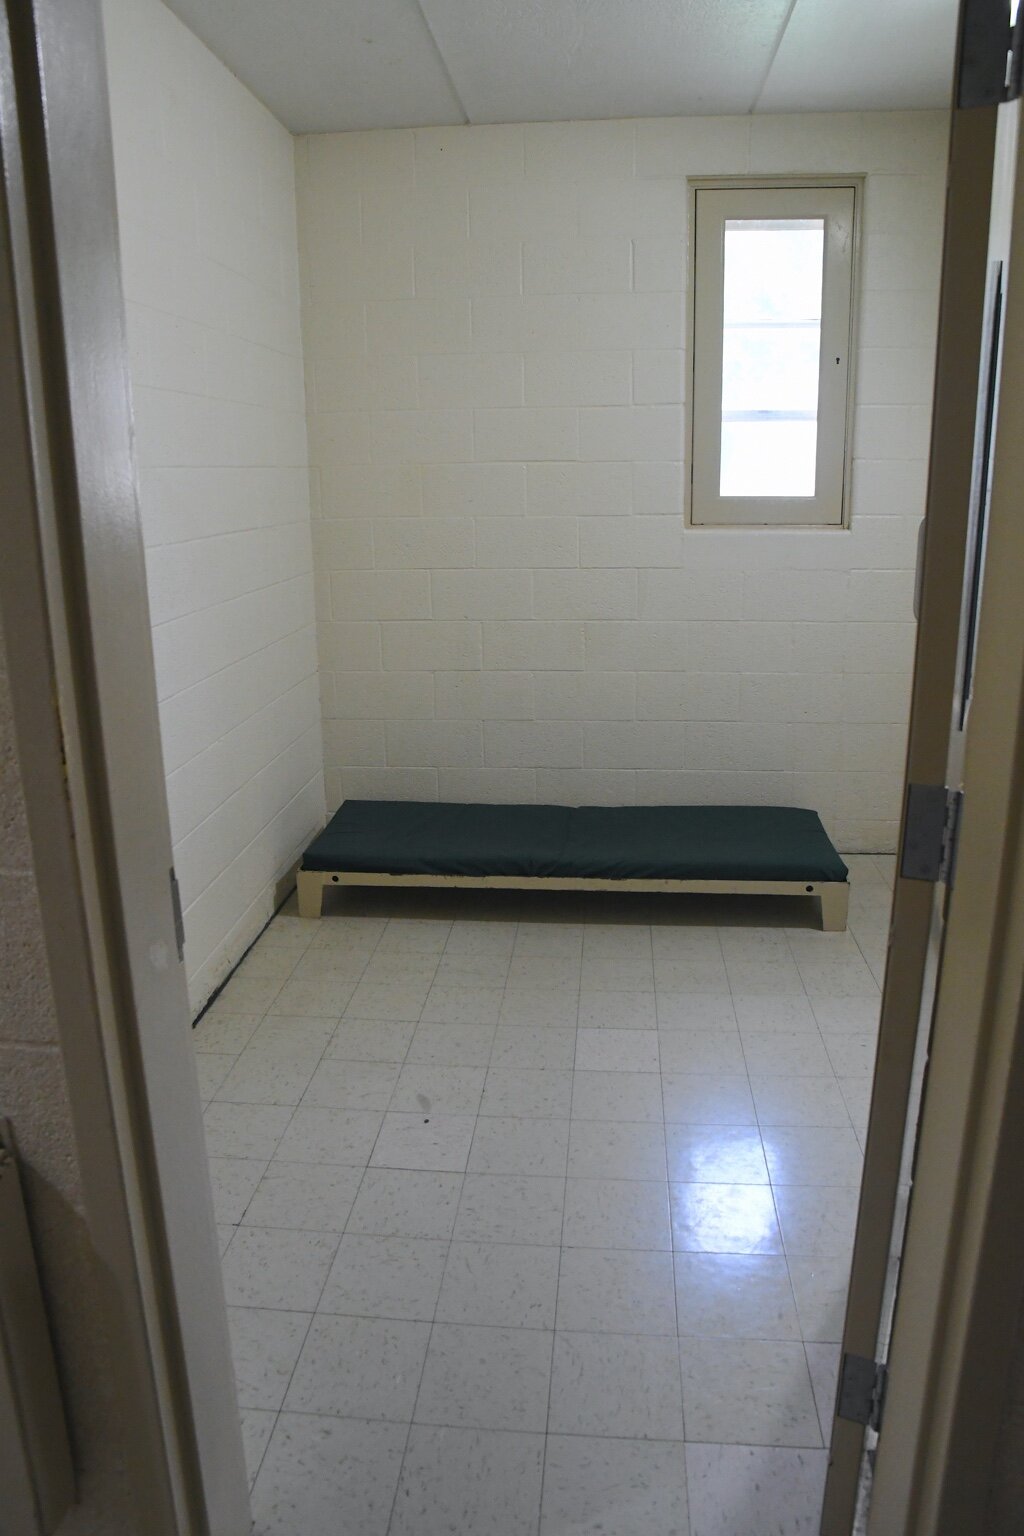 A residential bedroom of the Calhoun County Youth Center which will be remodeled.